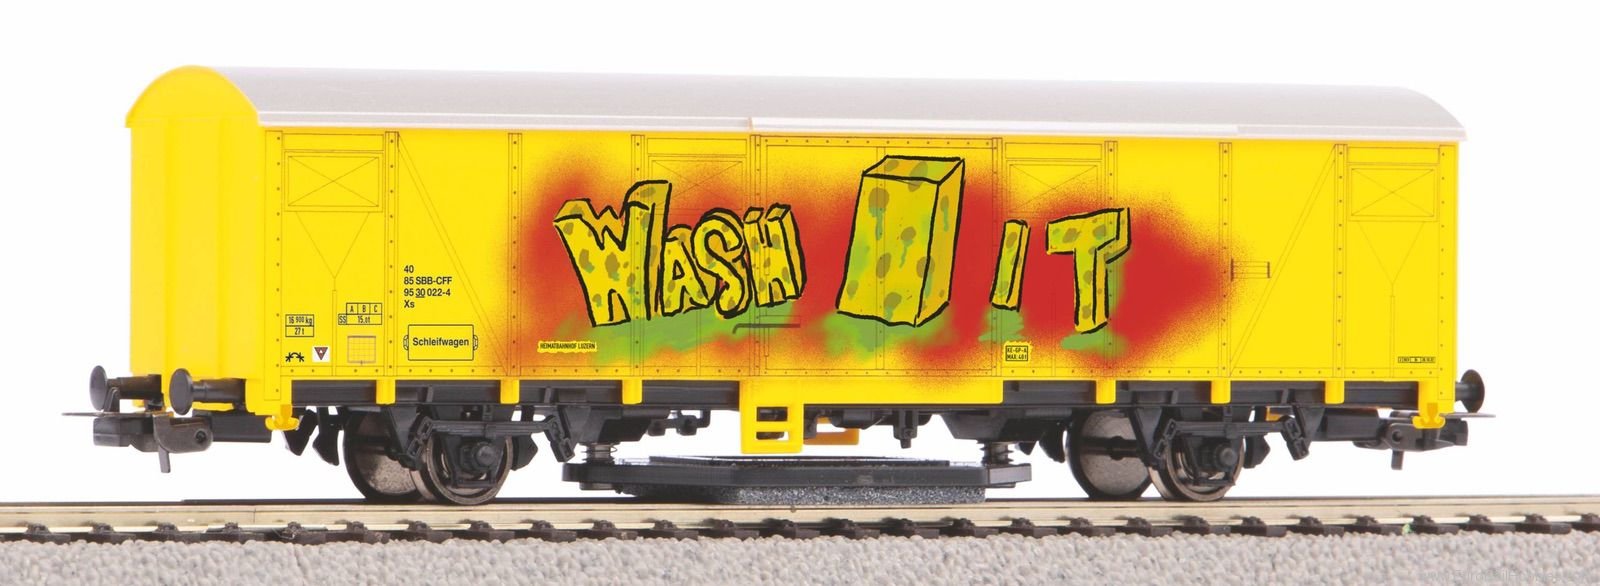 Piko 54309 SBB VI track cleaning car with graffiti (DC P